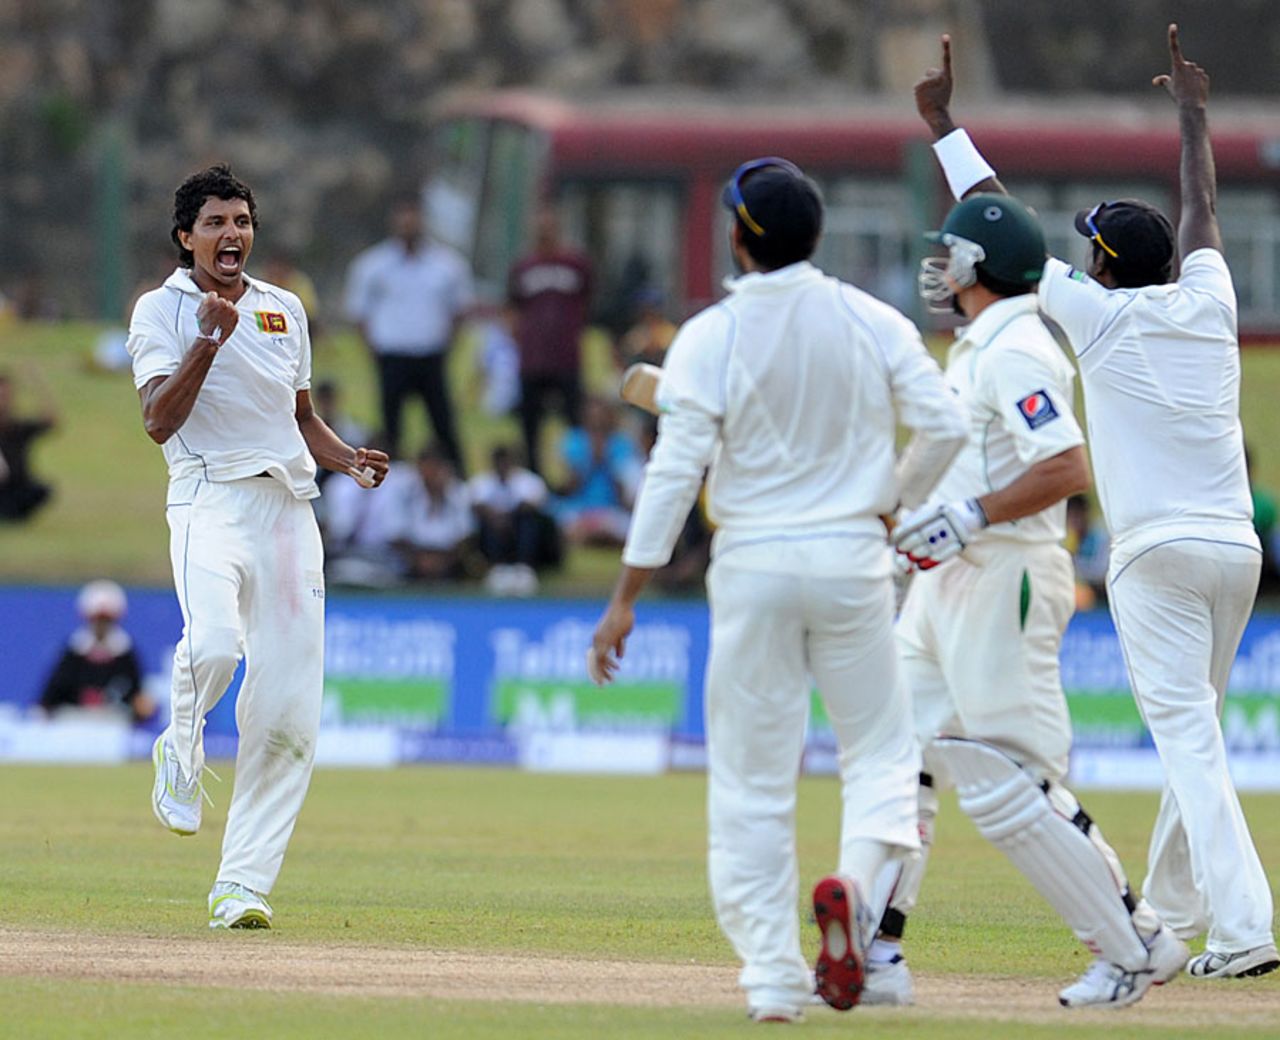 Suraj Randiv took two wickets late in the day, Sri Lanka v Pakistan, 1st Test, Galle, 2nd day, June 23, 2012